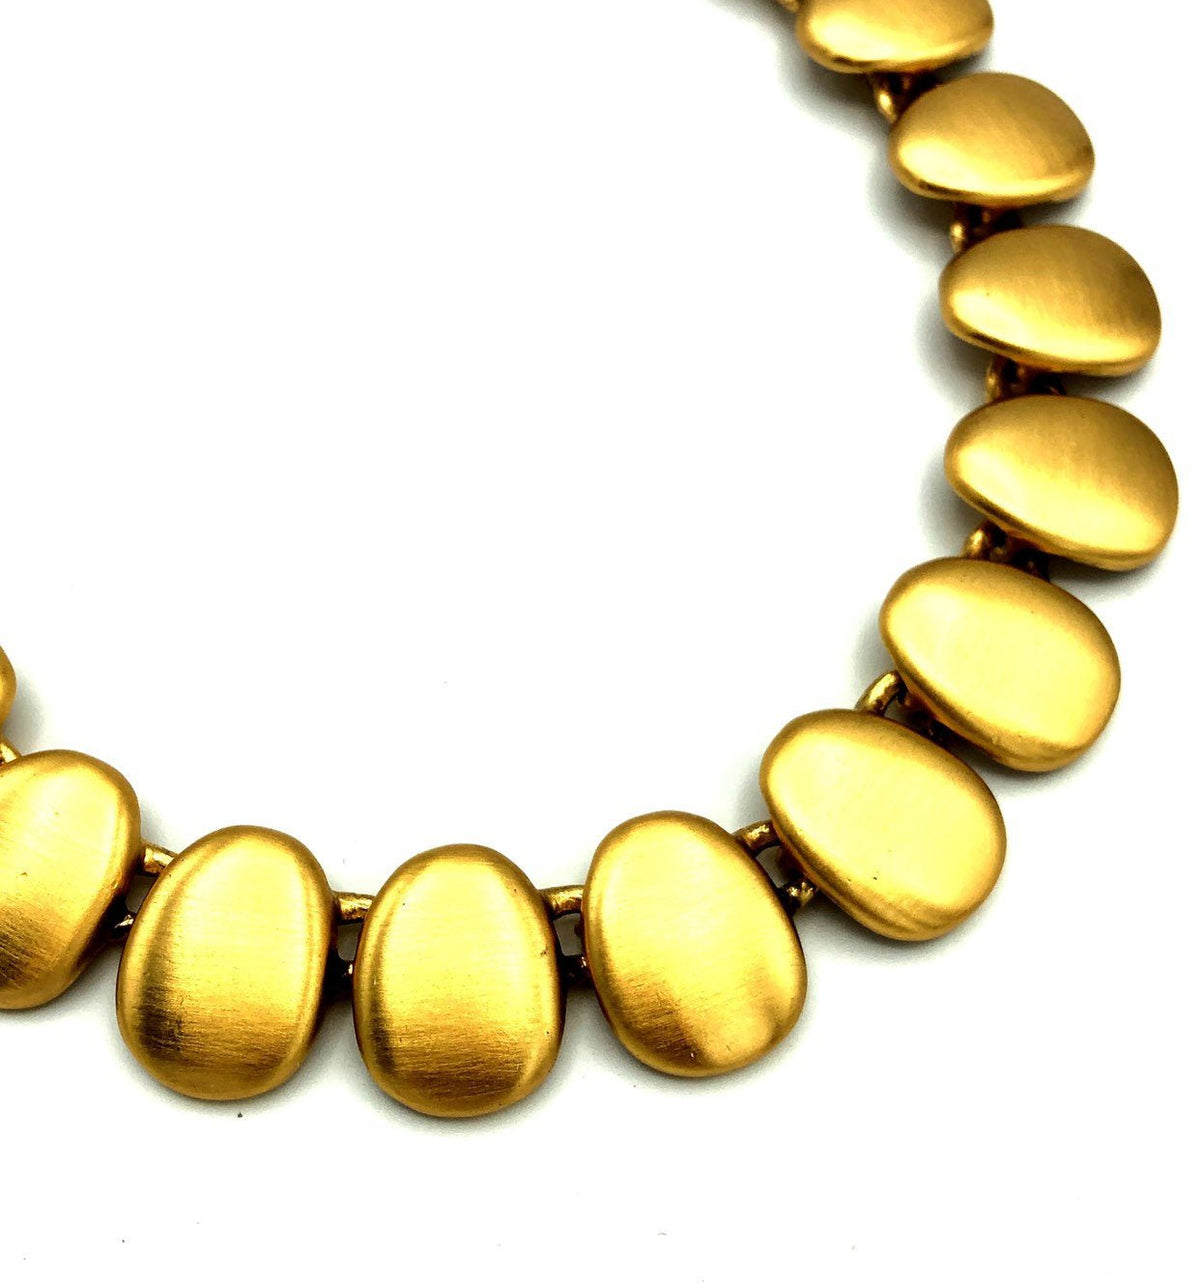 Vintage Anne Klein Classic Gold Necklace - 24 Wishes Vintage Jewelry